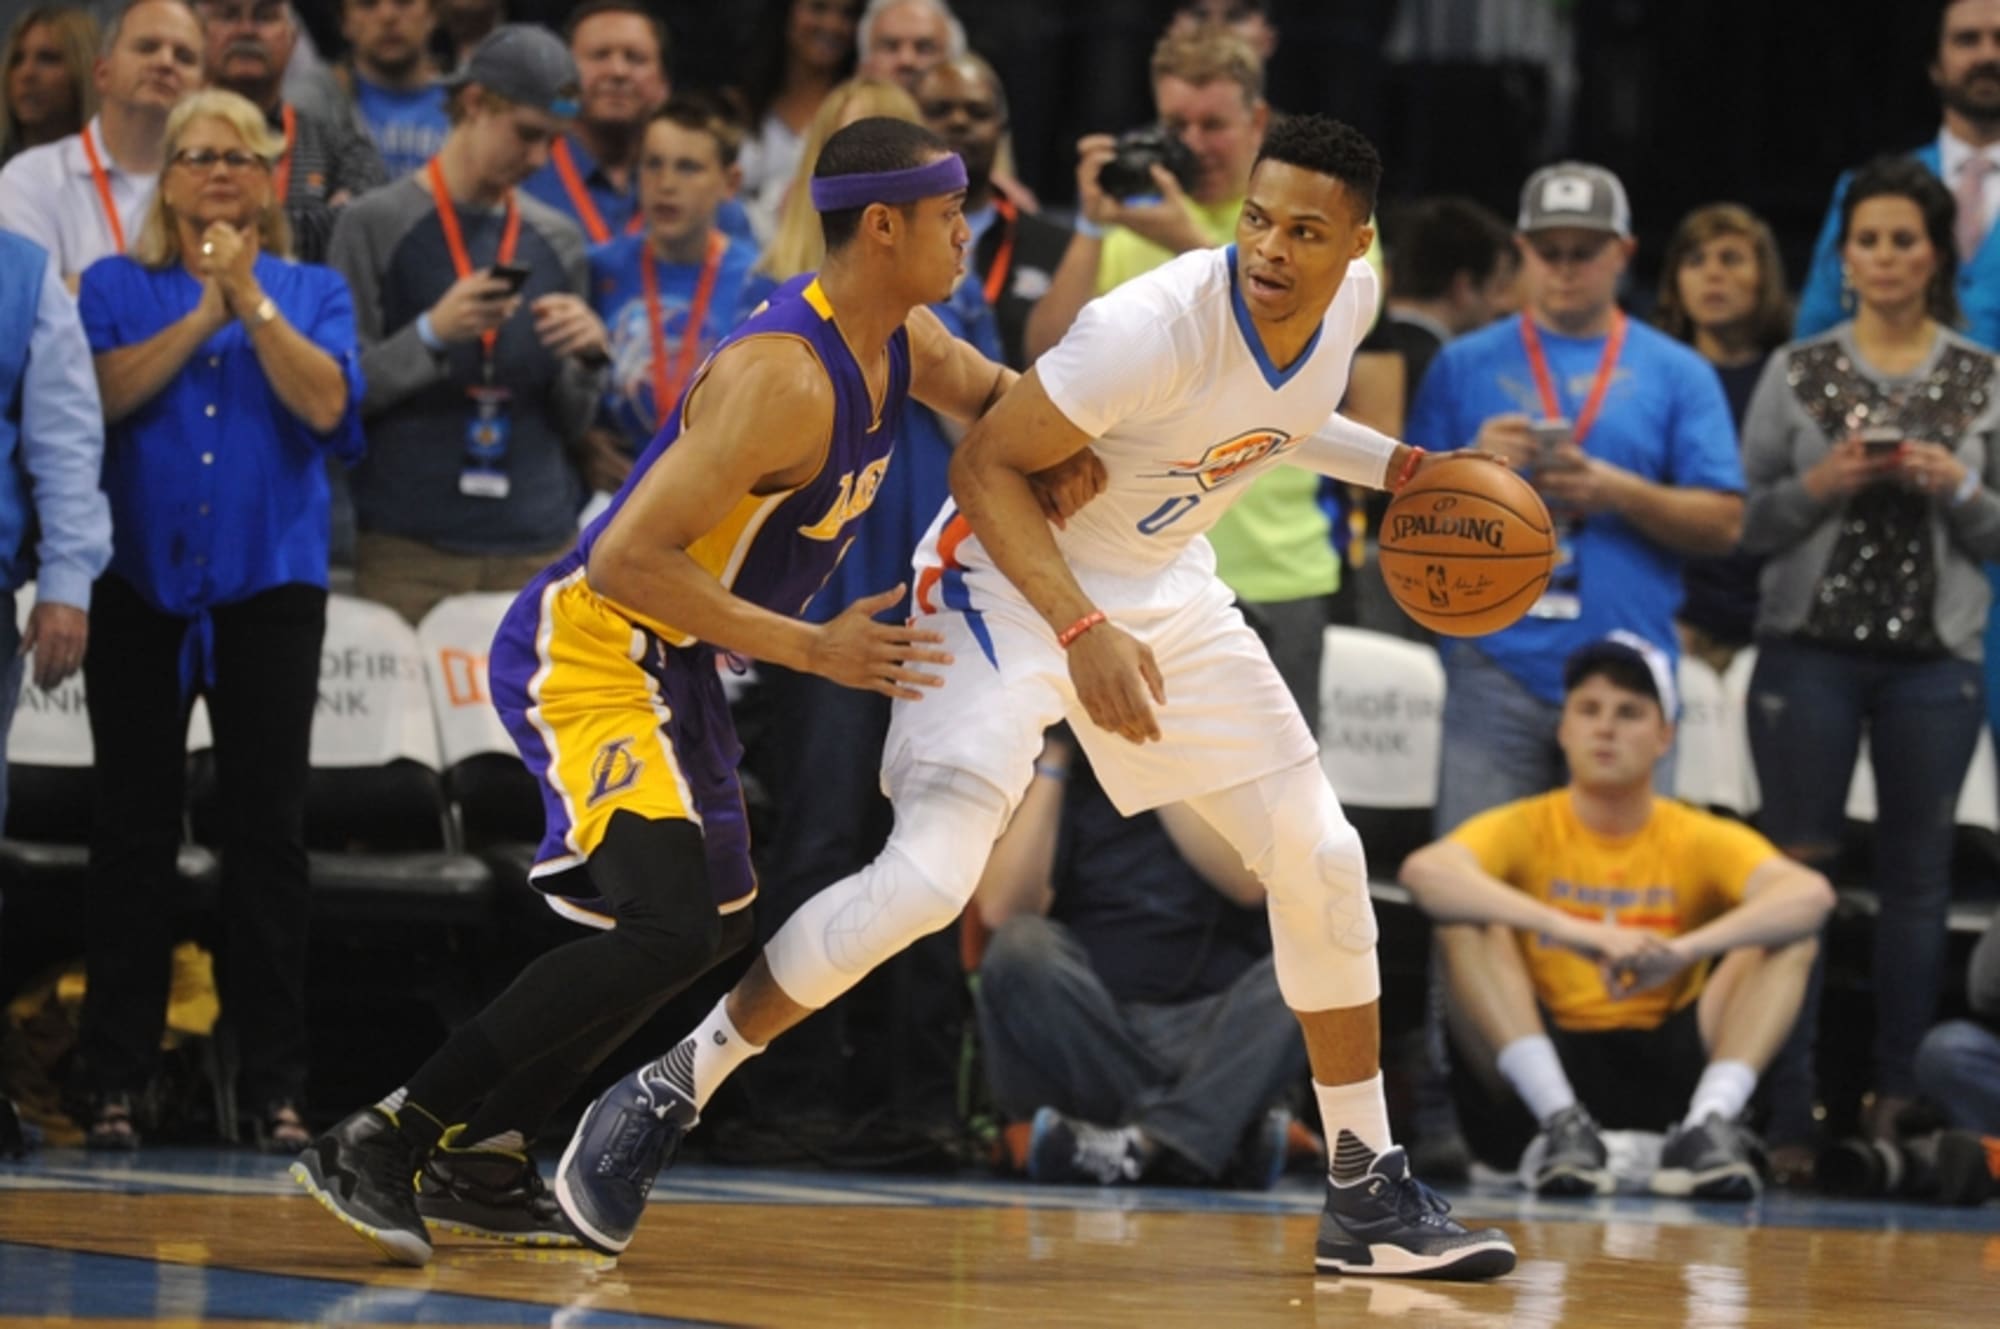 Lakers guard Jordan Clarkson strives to be a complete player - Los